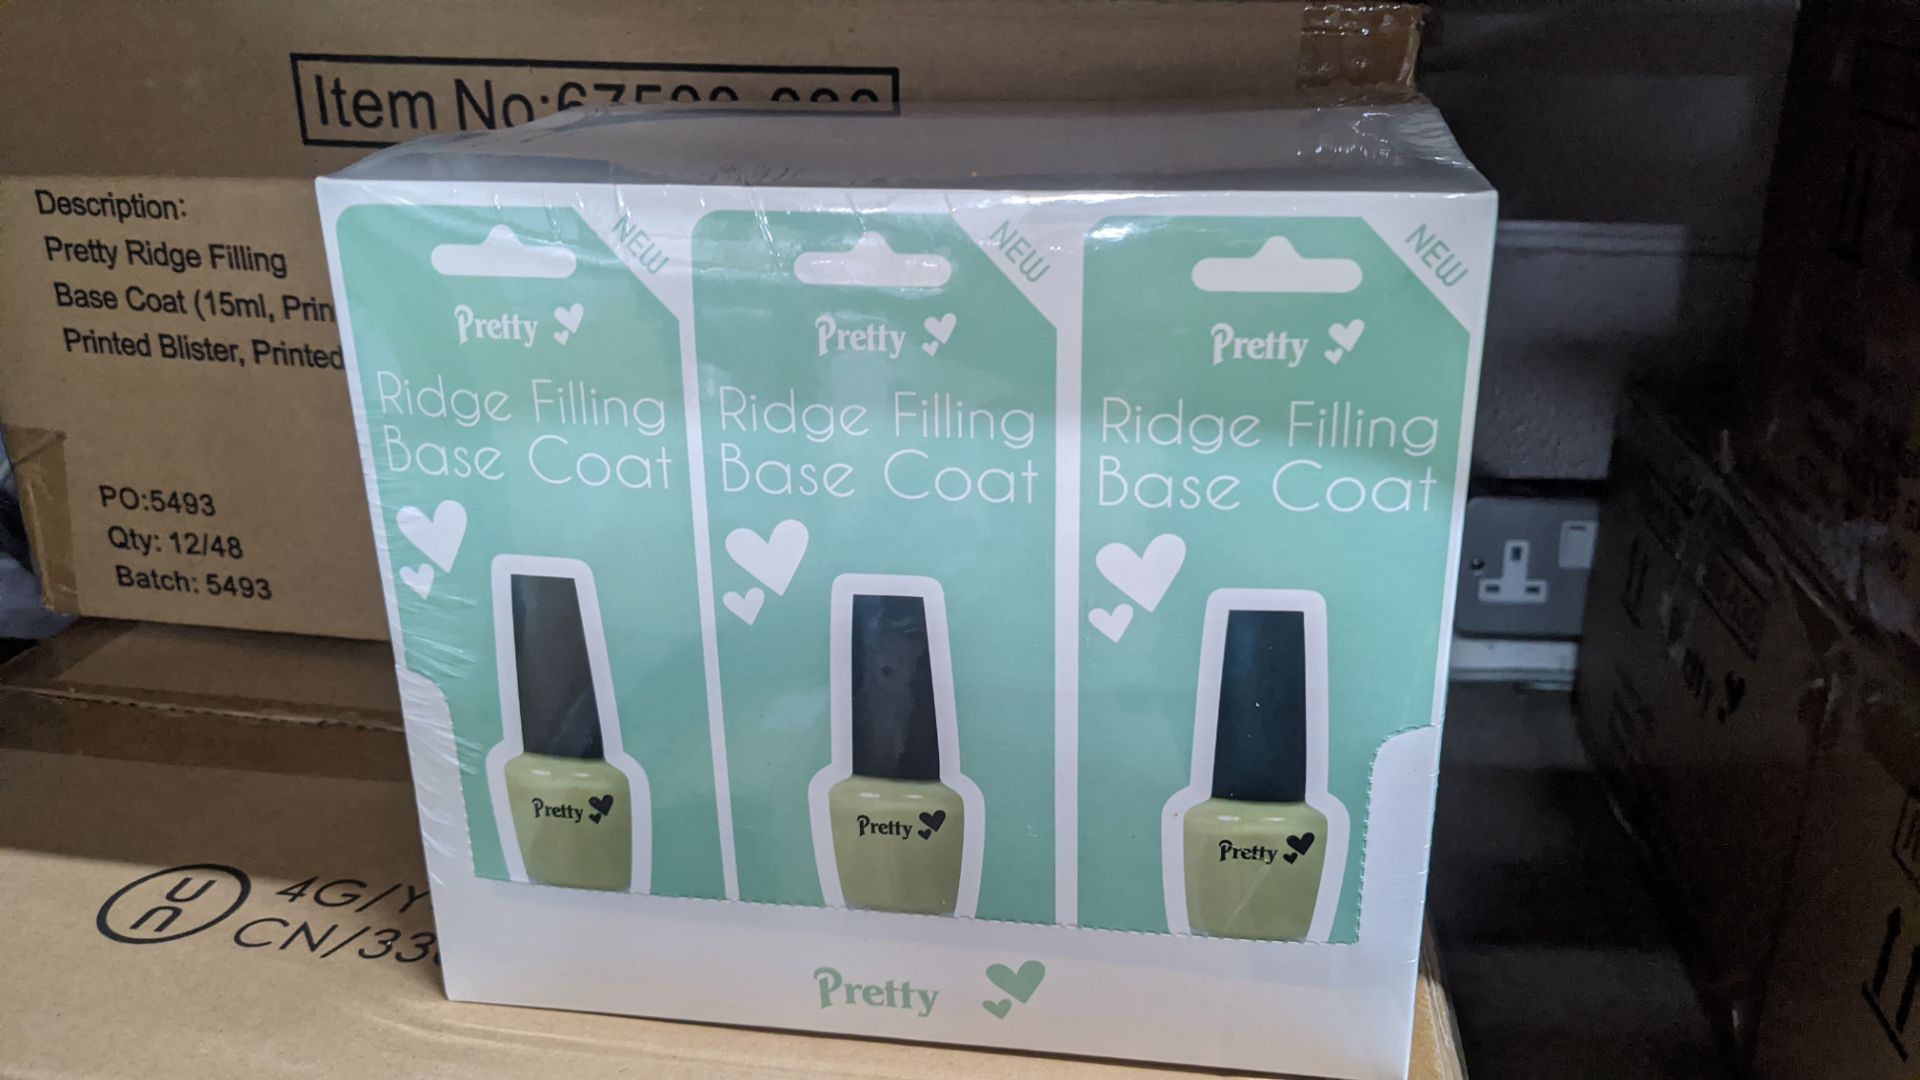 4 boxes of Pretty ridge filling base coat - each carton contains 4 display boxes & each display box - Image 4 of 4